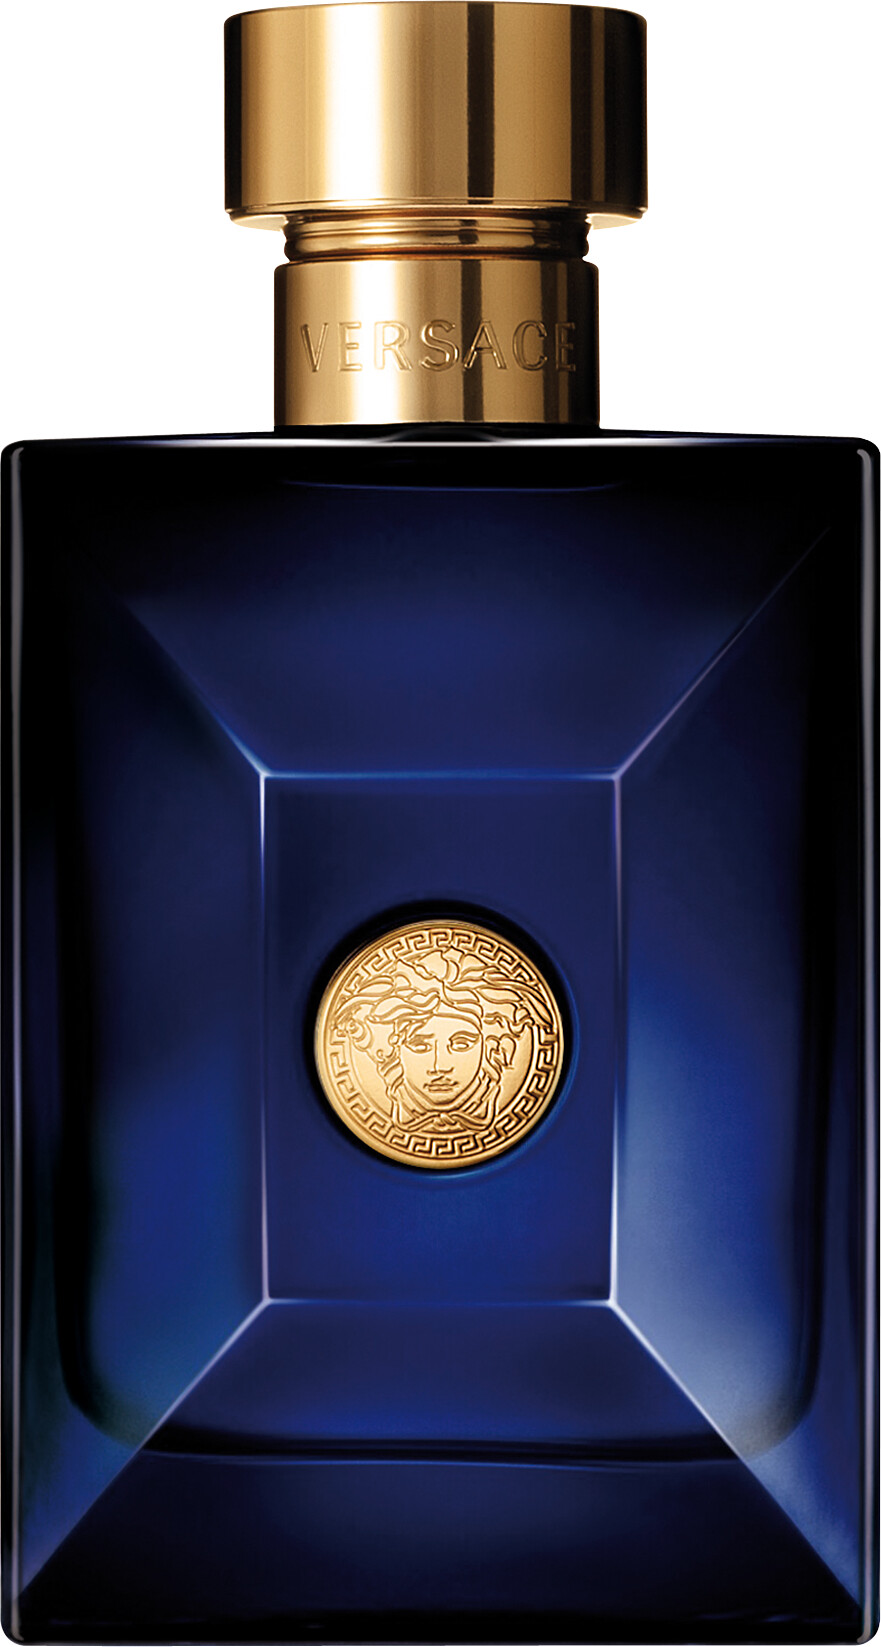 versace pour homme dylan blue 100ml